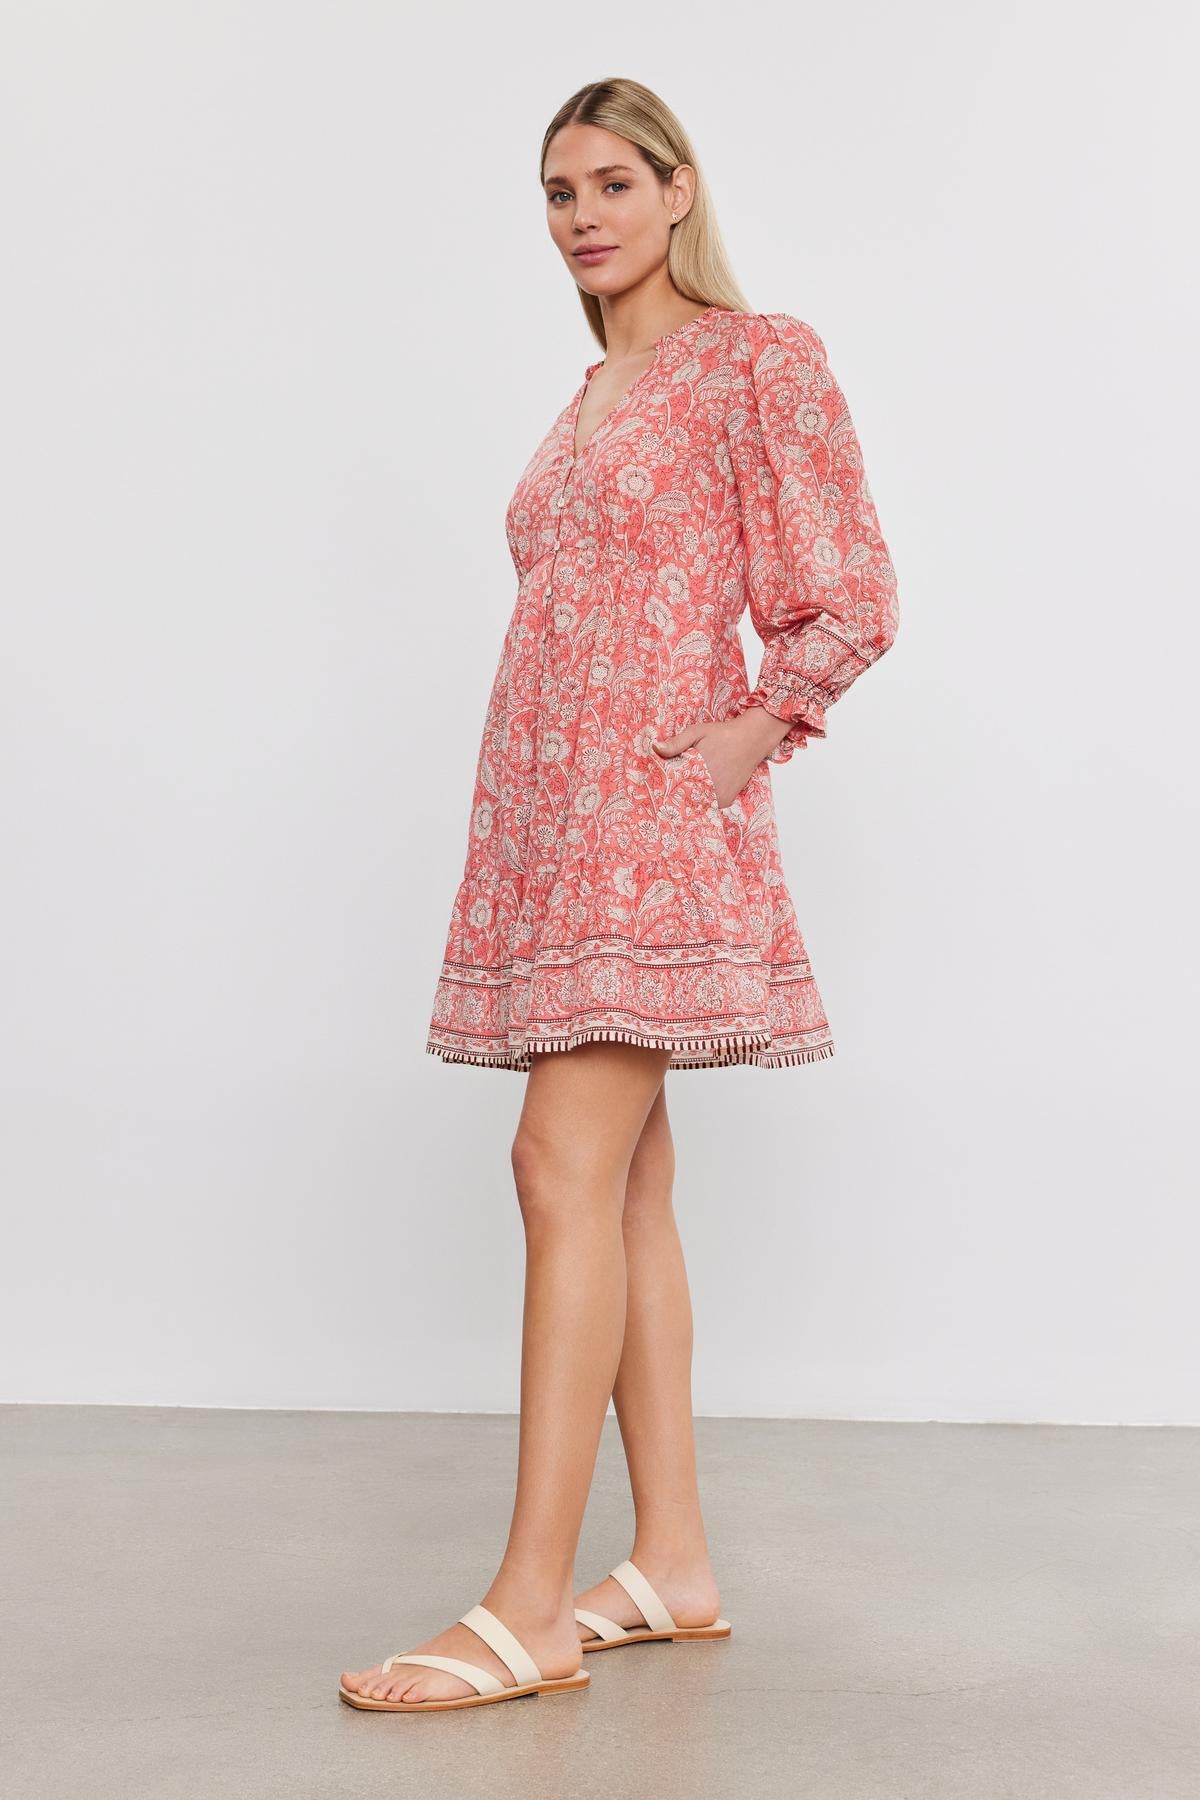 Woman in a floral print cotton voile Velvet by Graham & Spencer MARY DRESS and white sandals standing against a plain background.-36910098874561